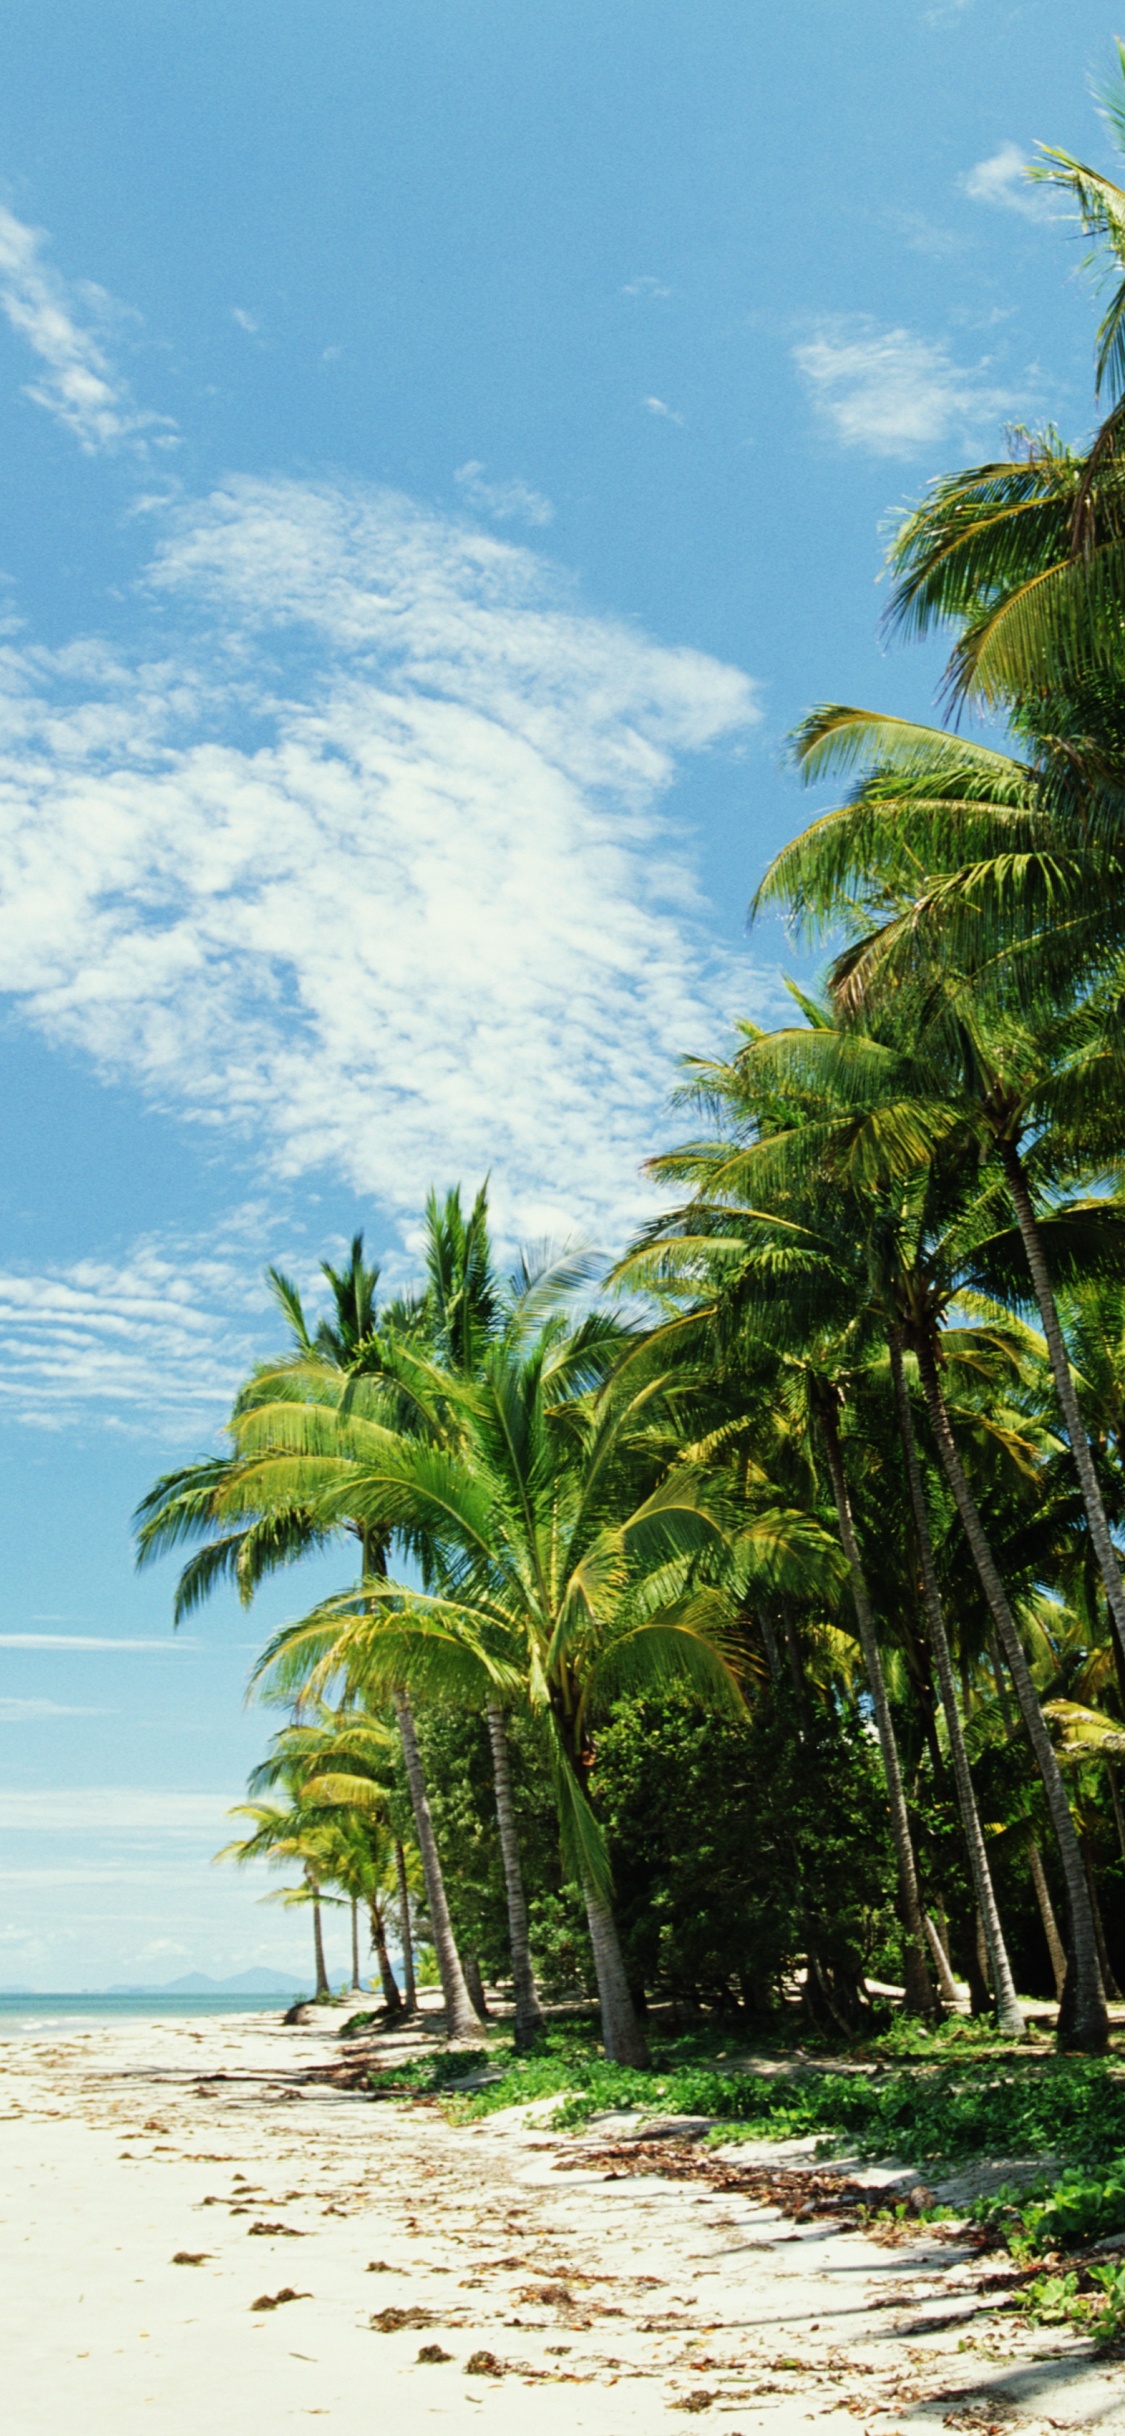 Green Palm Trees on White Sand Beach During Daytime. Wallpaper in 1125x2436 Resolution